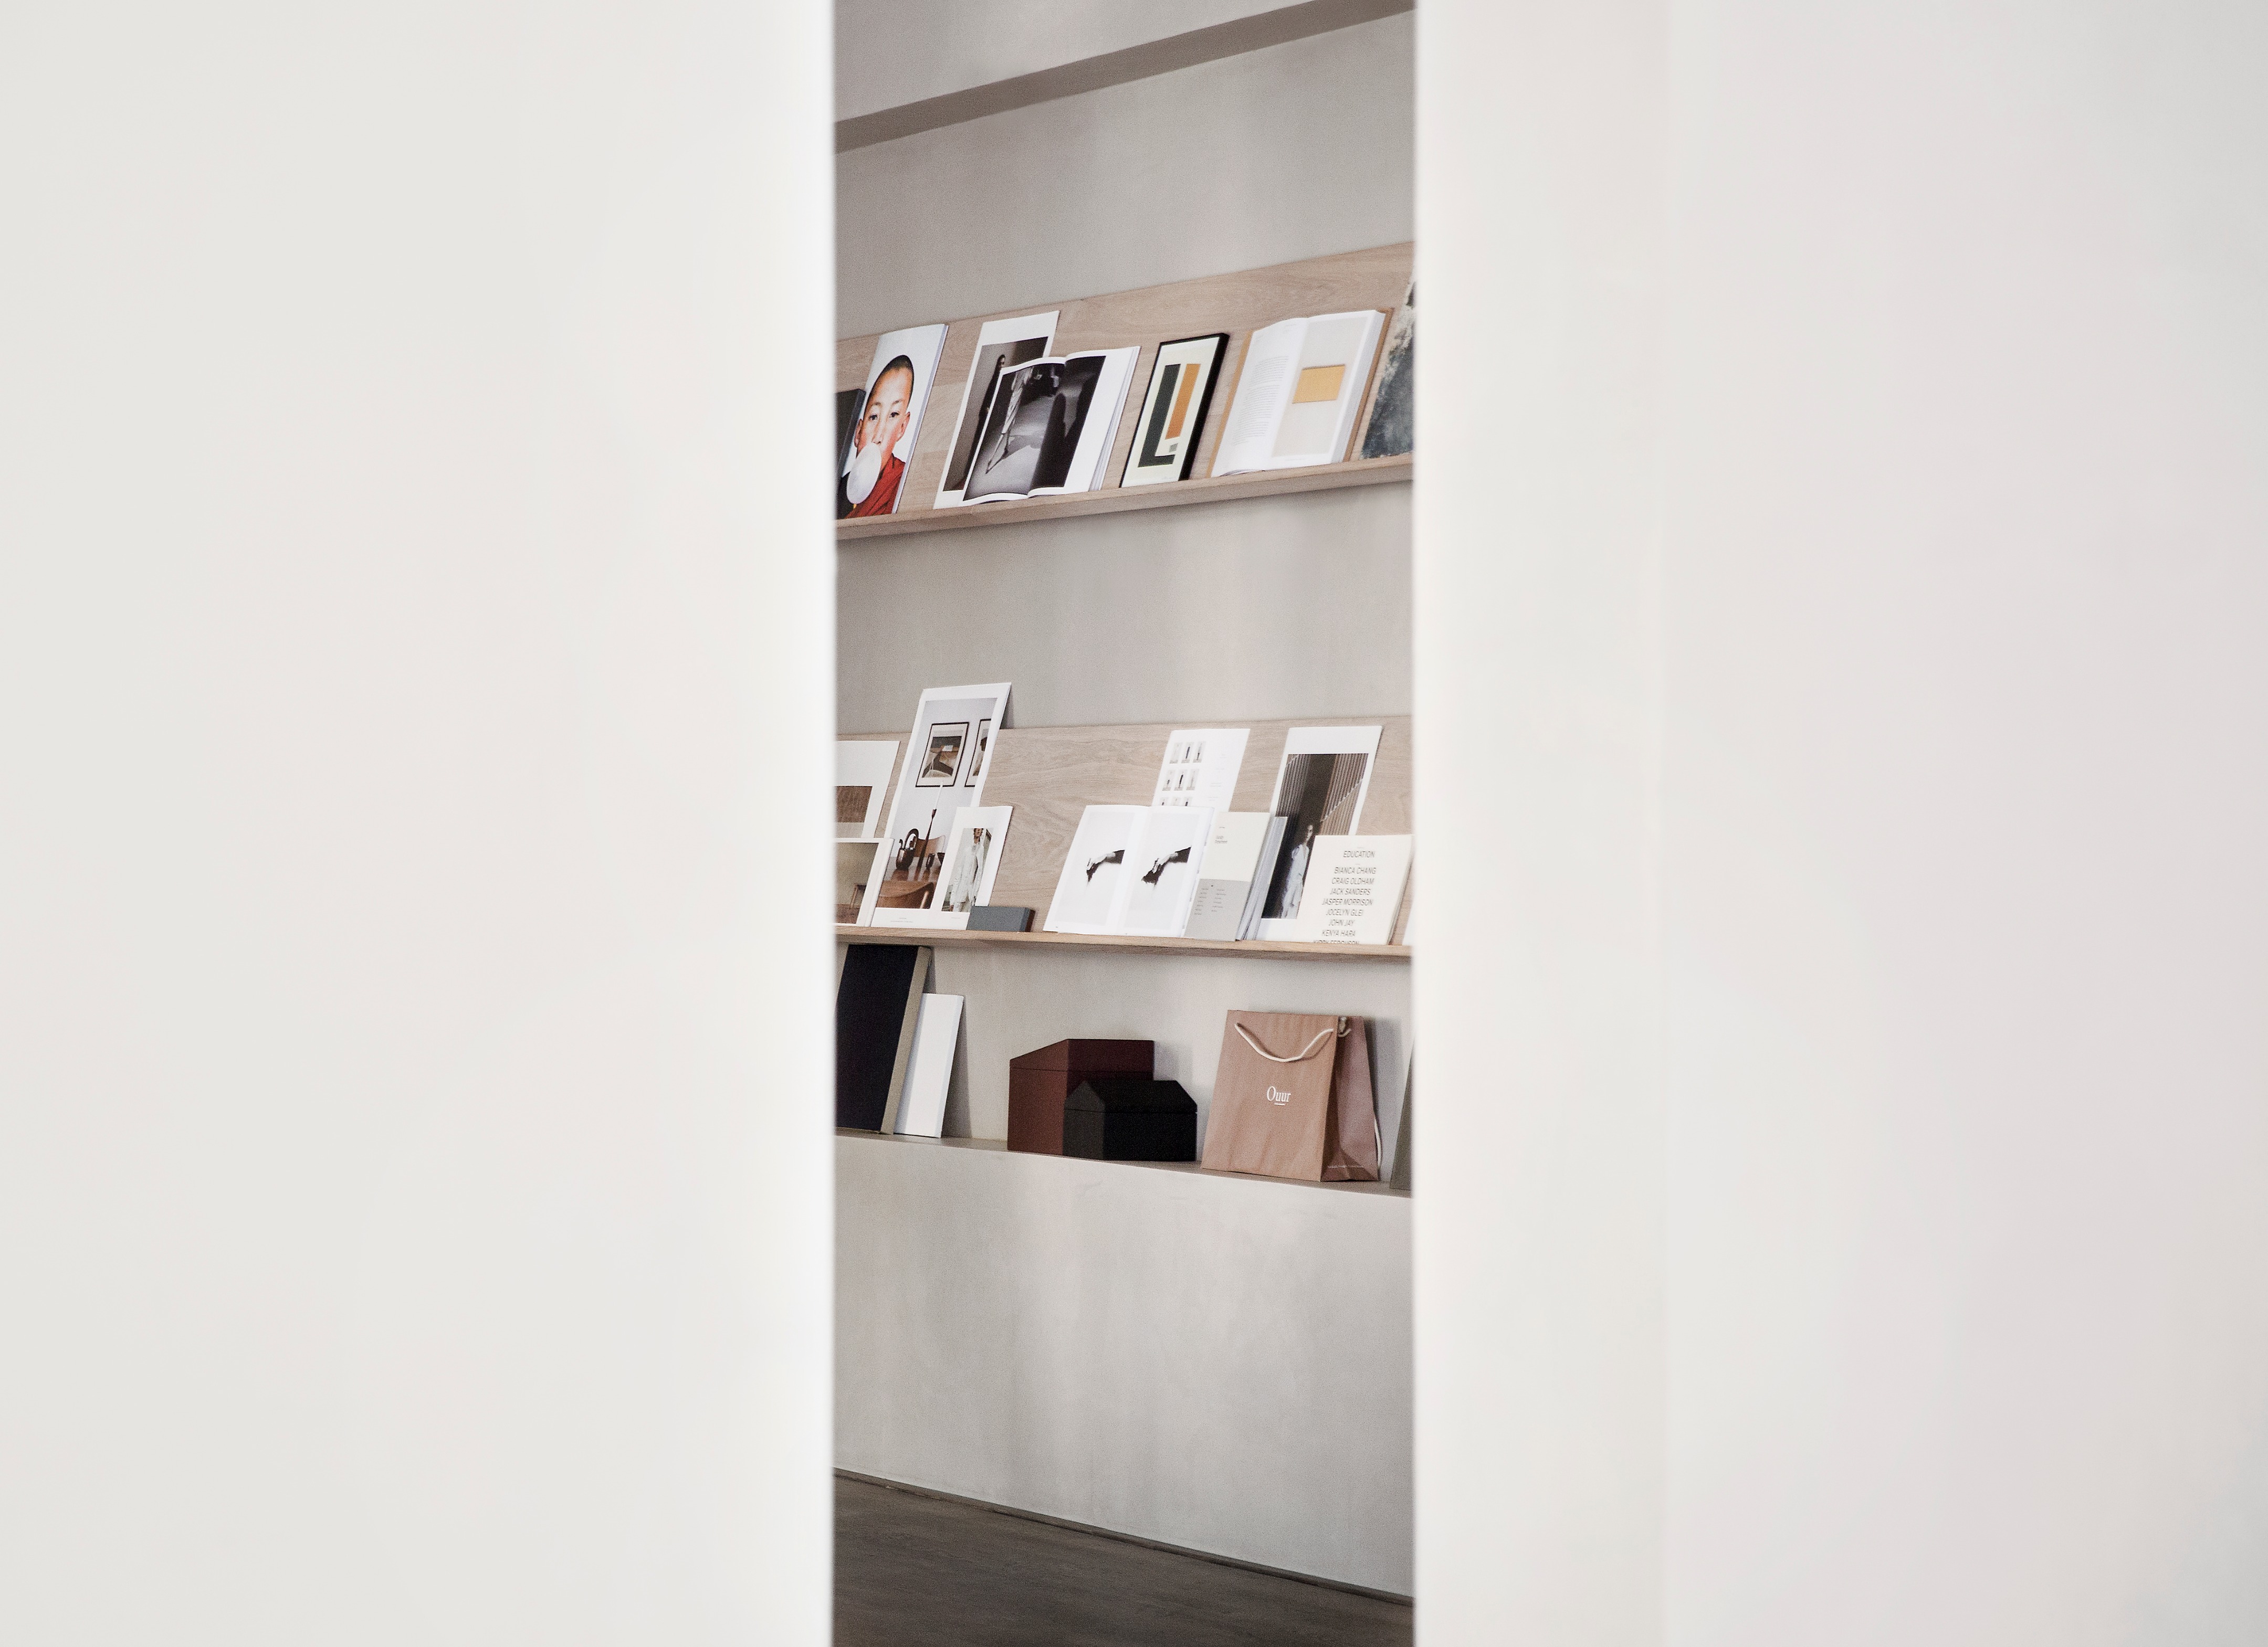 The Kinfolk Gallery - Office Space & Gallery | Norm Architects